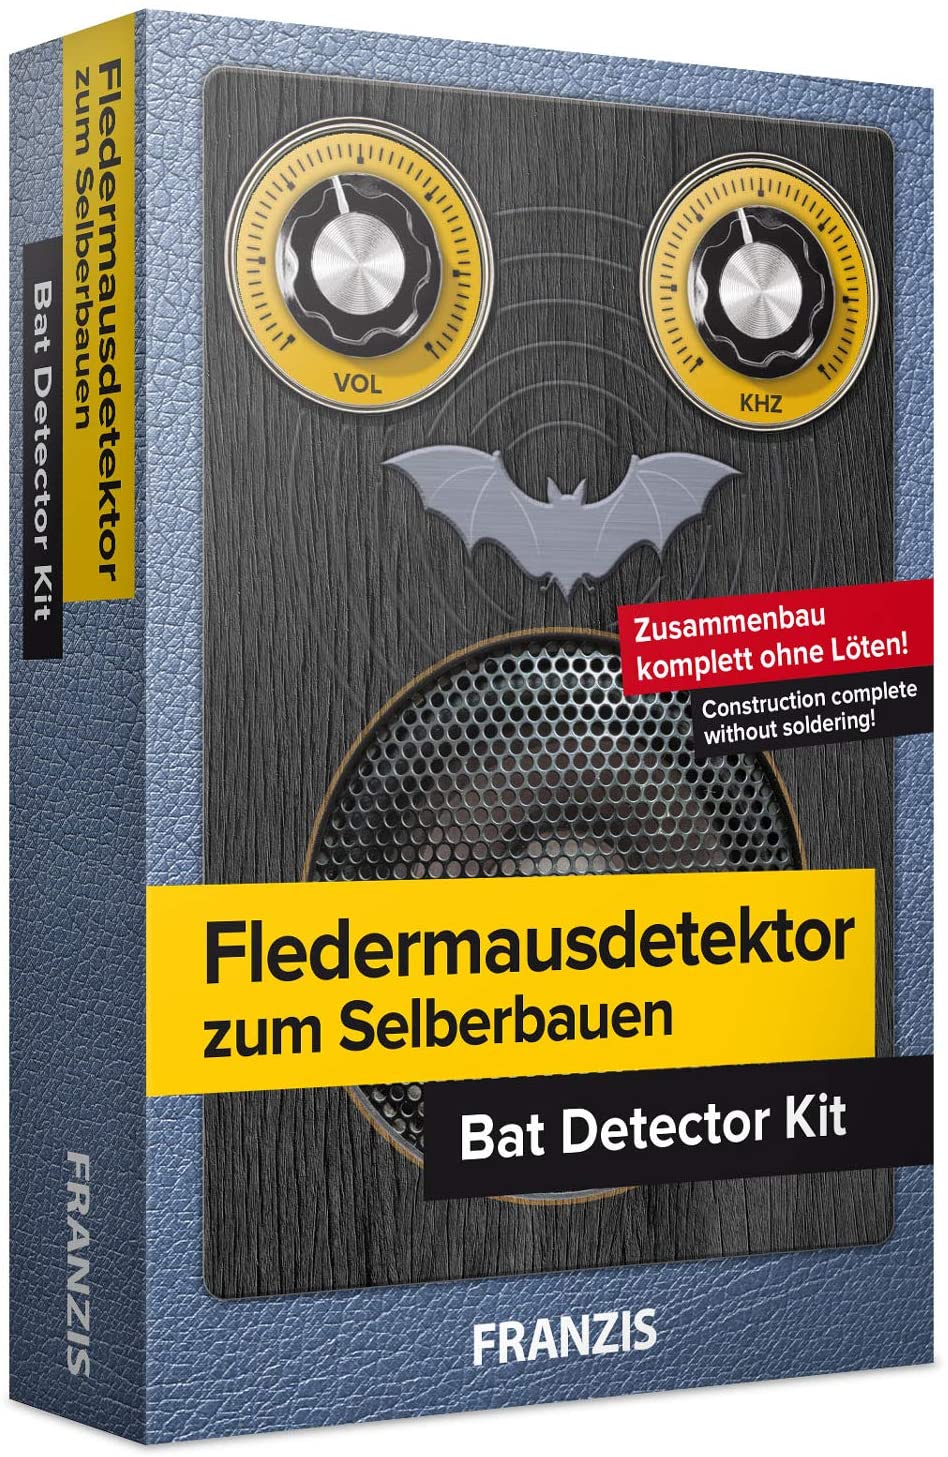 Franzis Bat Detector For Self-Assembly: Kit Complete Without Soldering. For